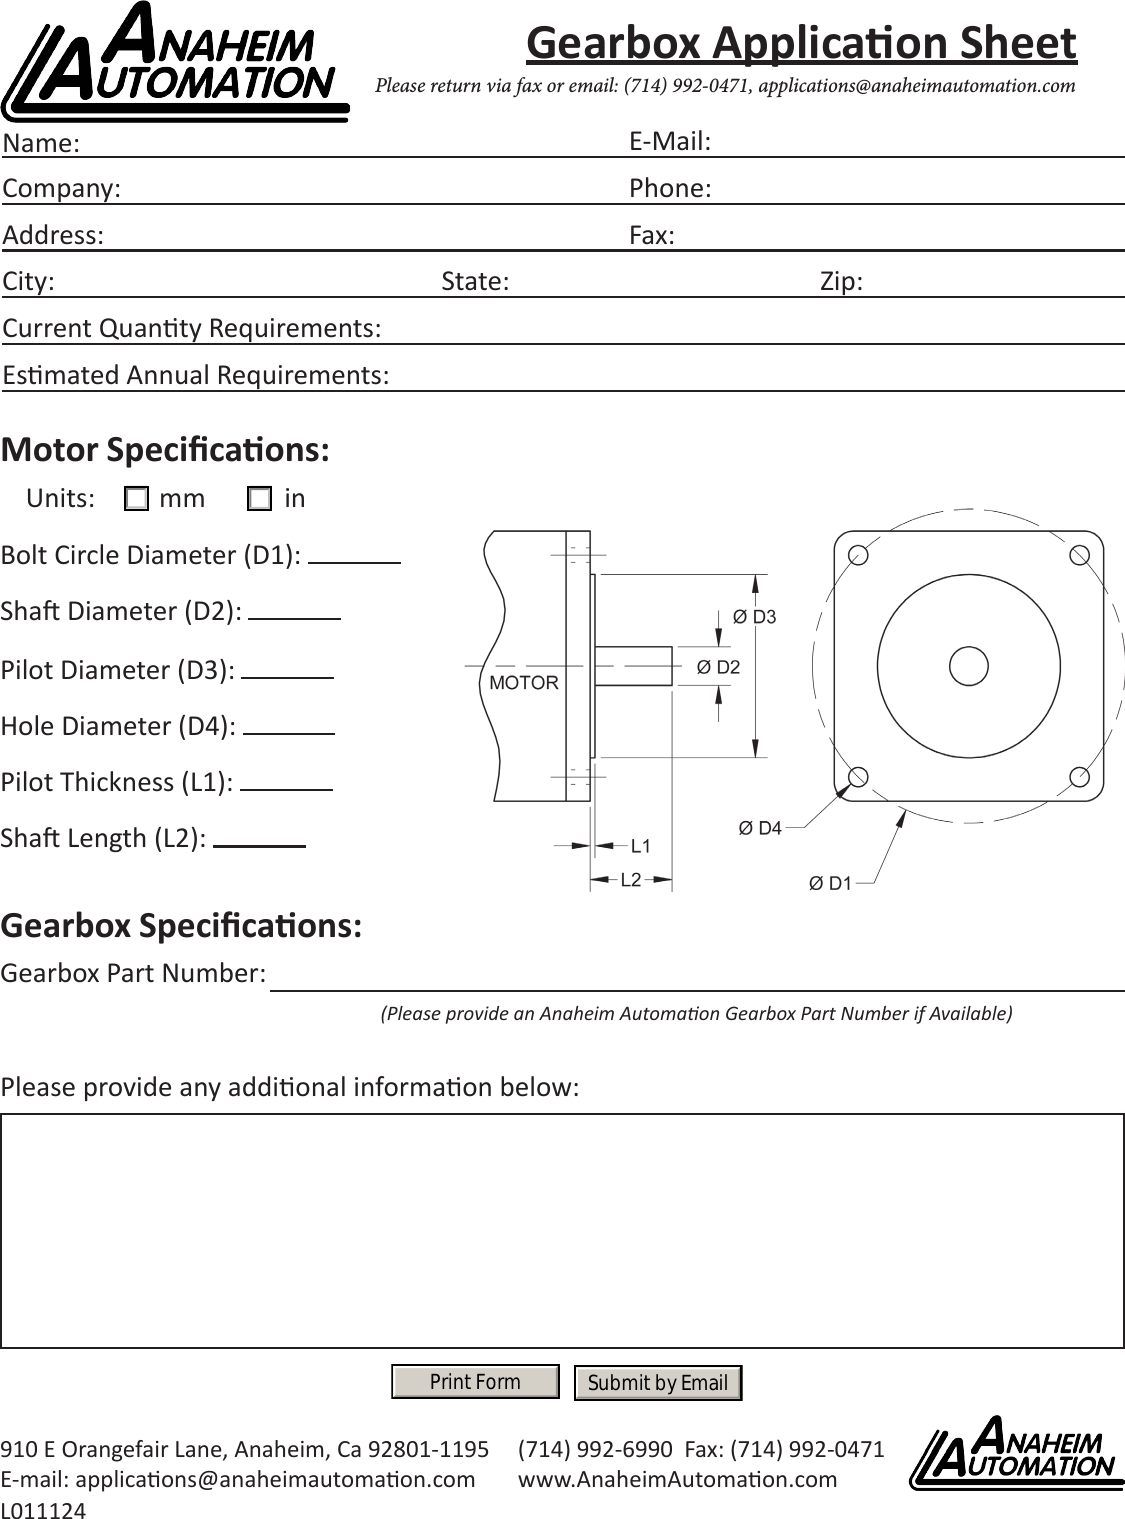 Page 1 of 1 - Gearbox Application Form